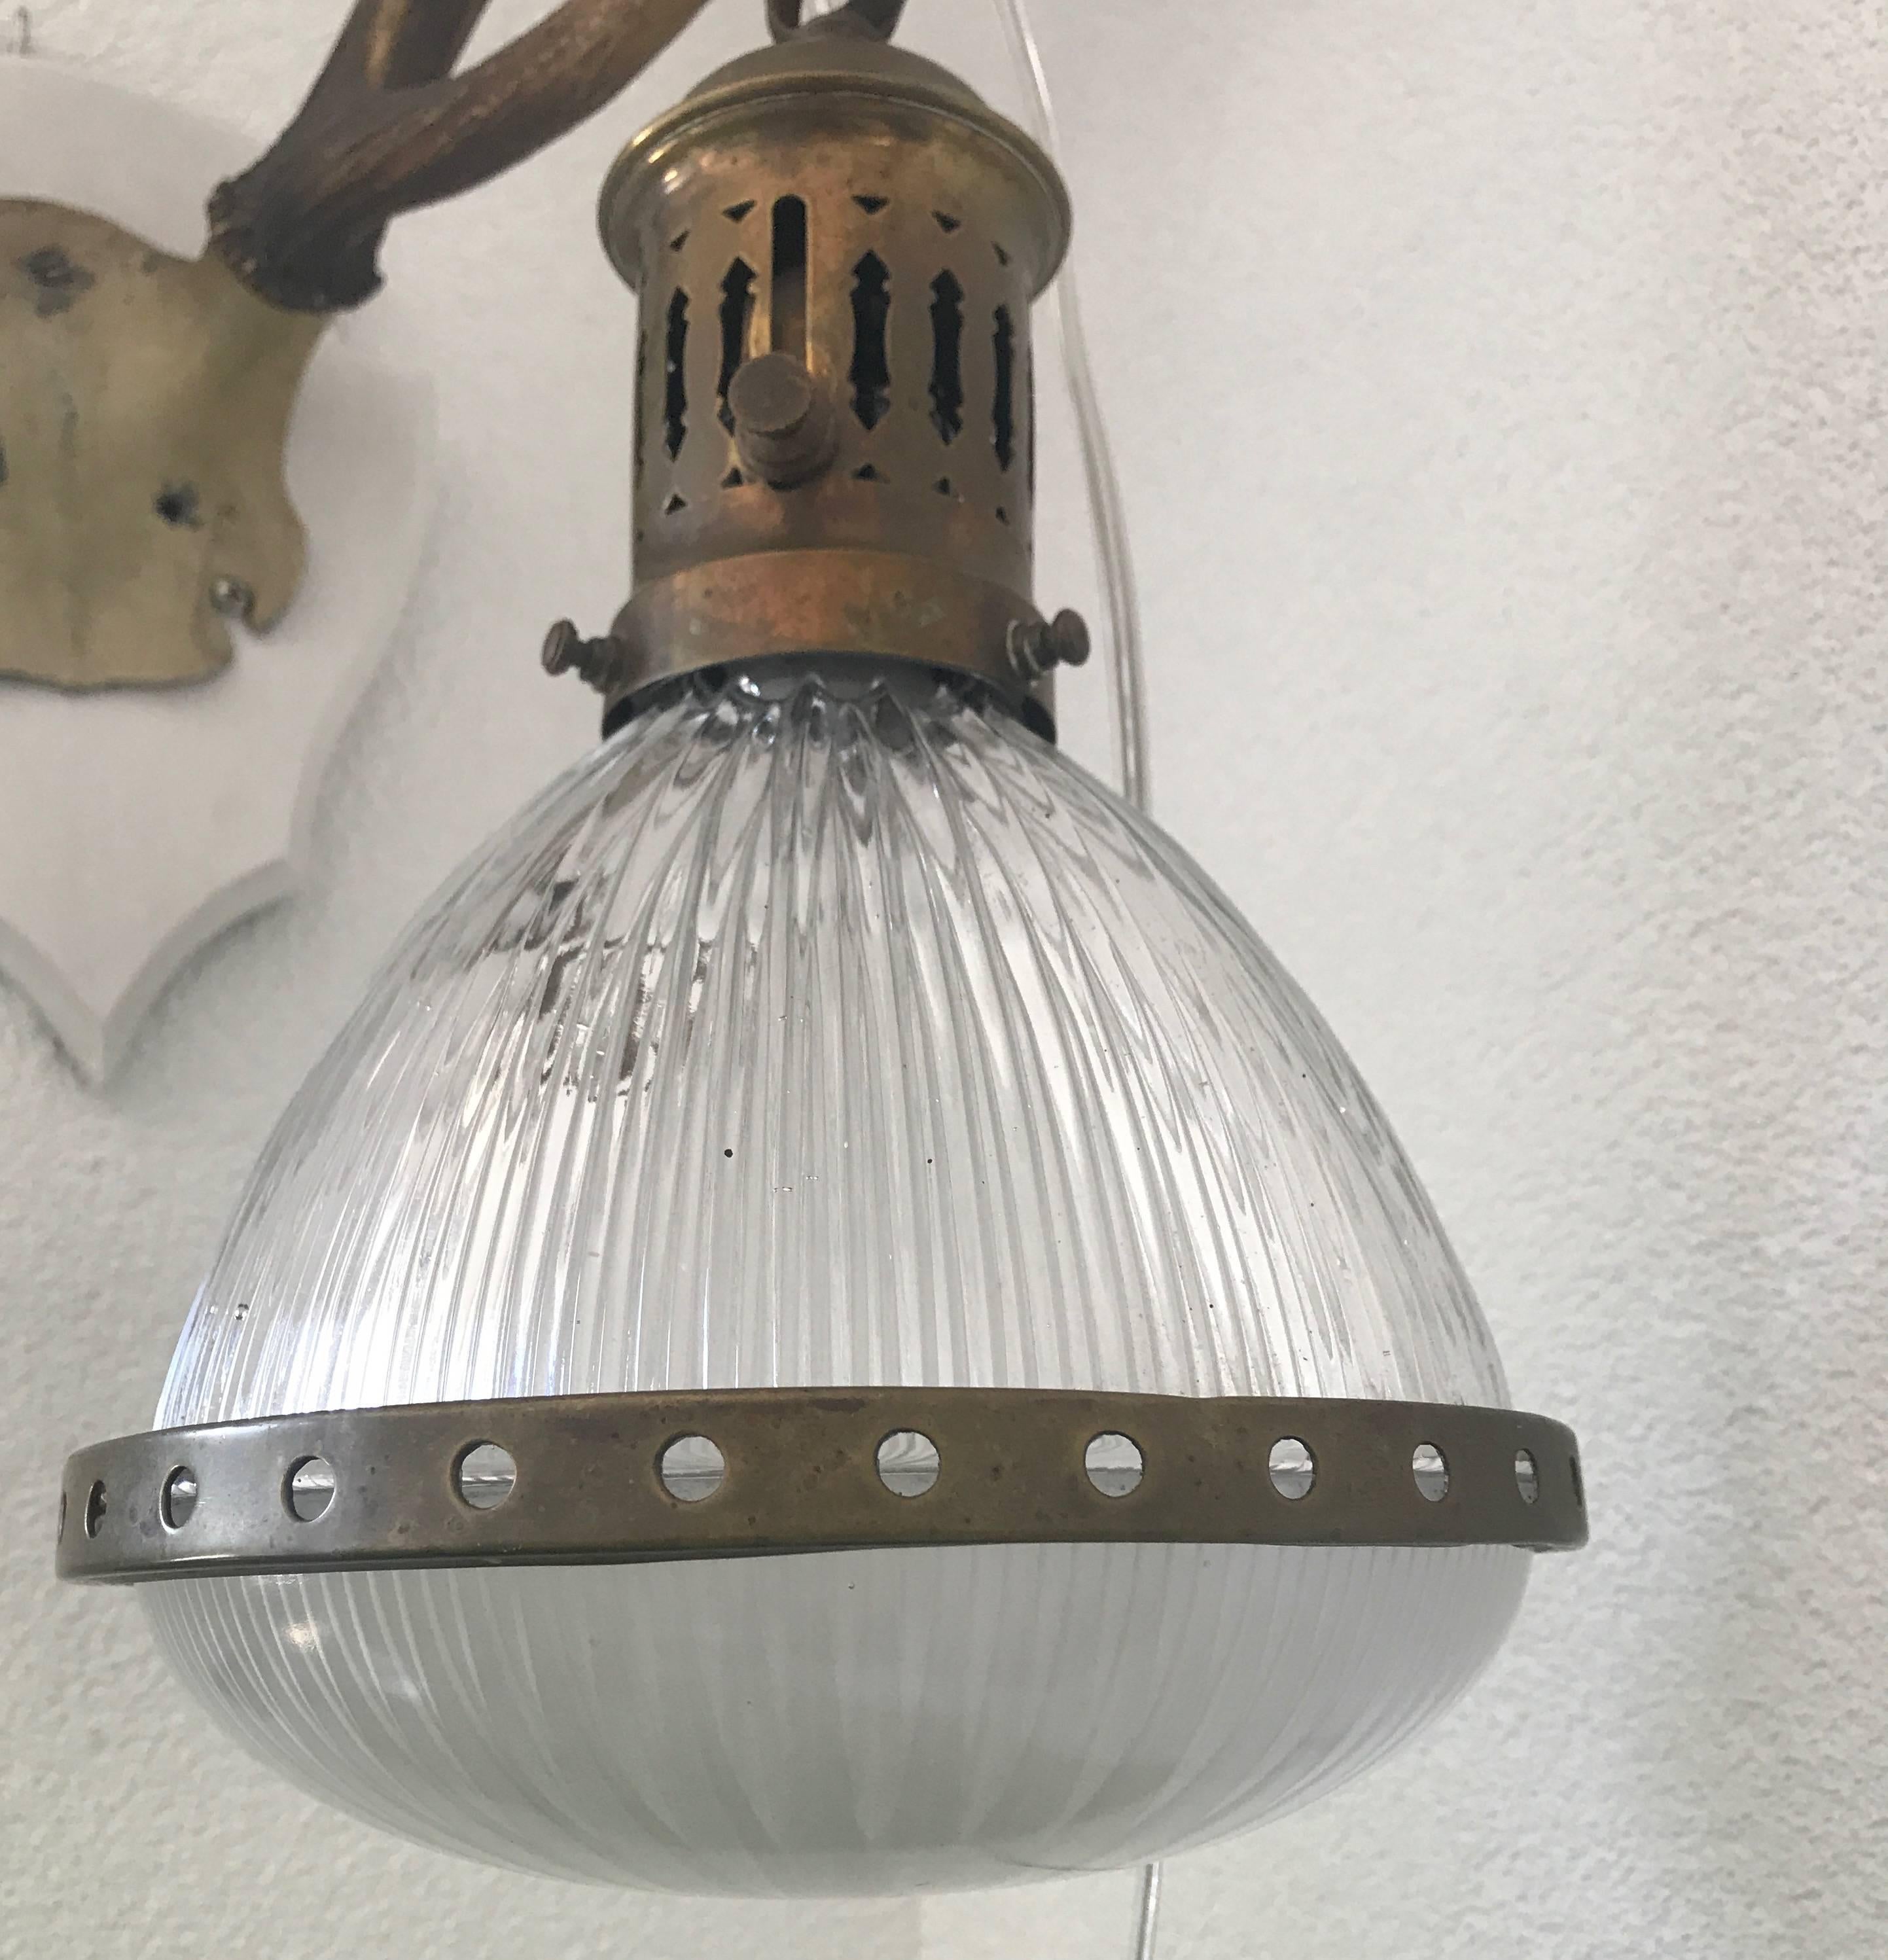 Rare size and striking Art Deco pendant, circa 1920. 

If you are looking for the ideal pendant to light up your entrance, restroom or small bedroom then look no further. This fine Art Deco ceiling lamp with stunning glass shades is marked by